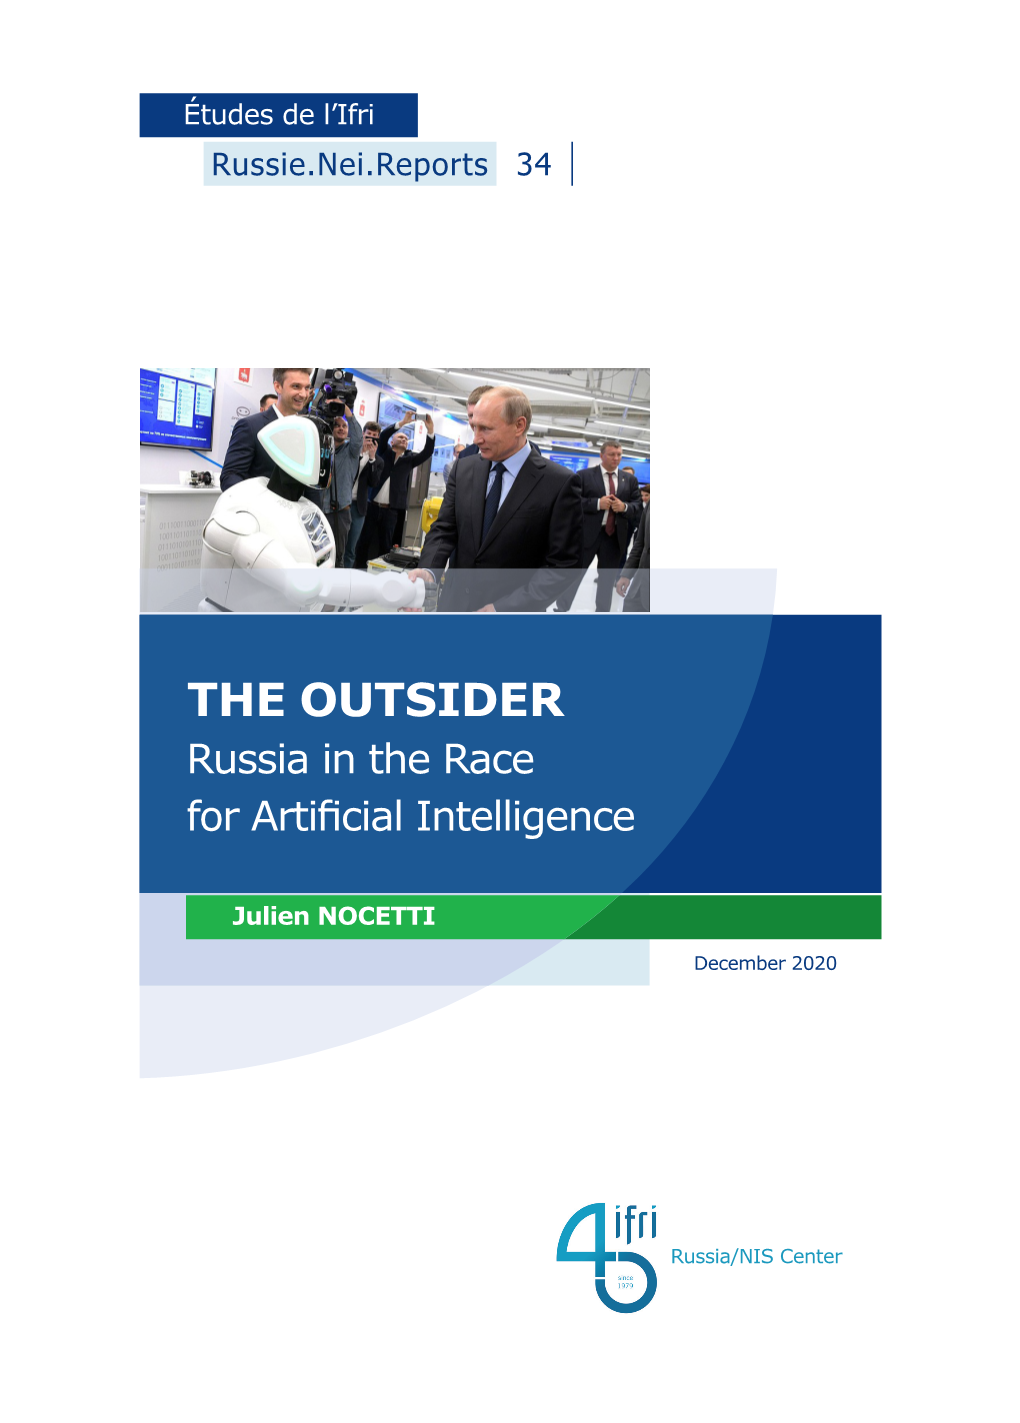 The Outsider: Russia in the Race for Artificial Intelligence”, Russie.Nei.Reports, No